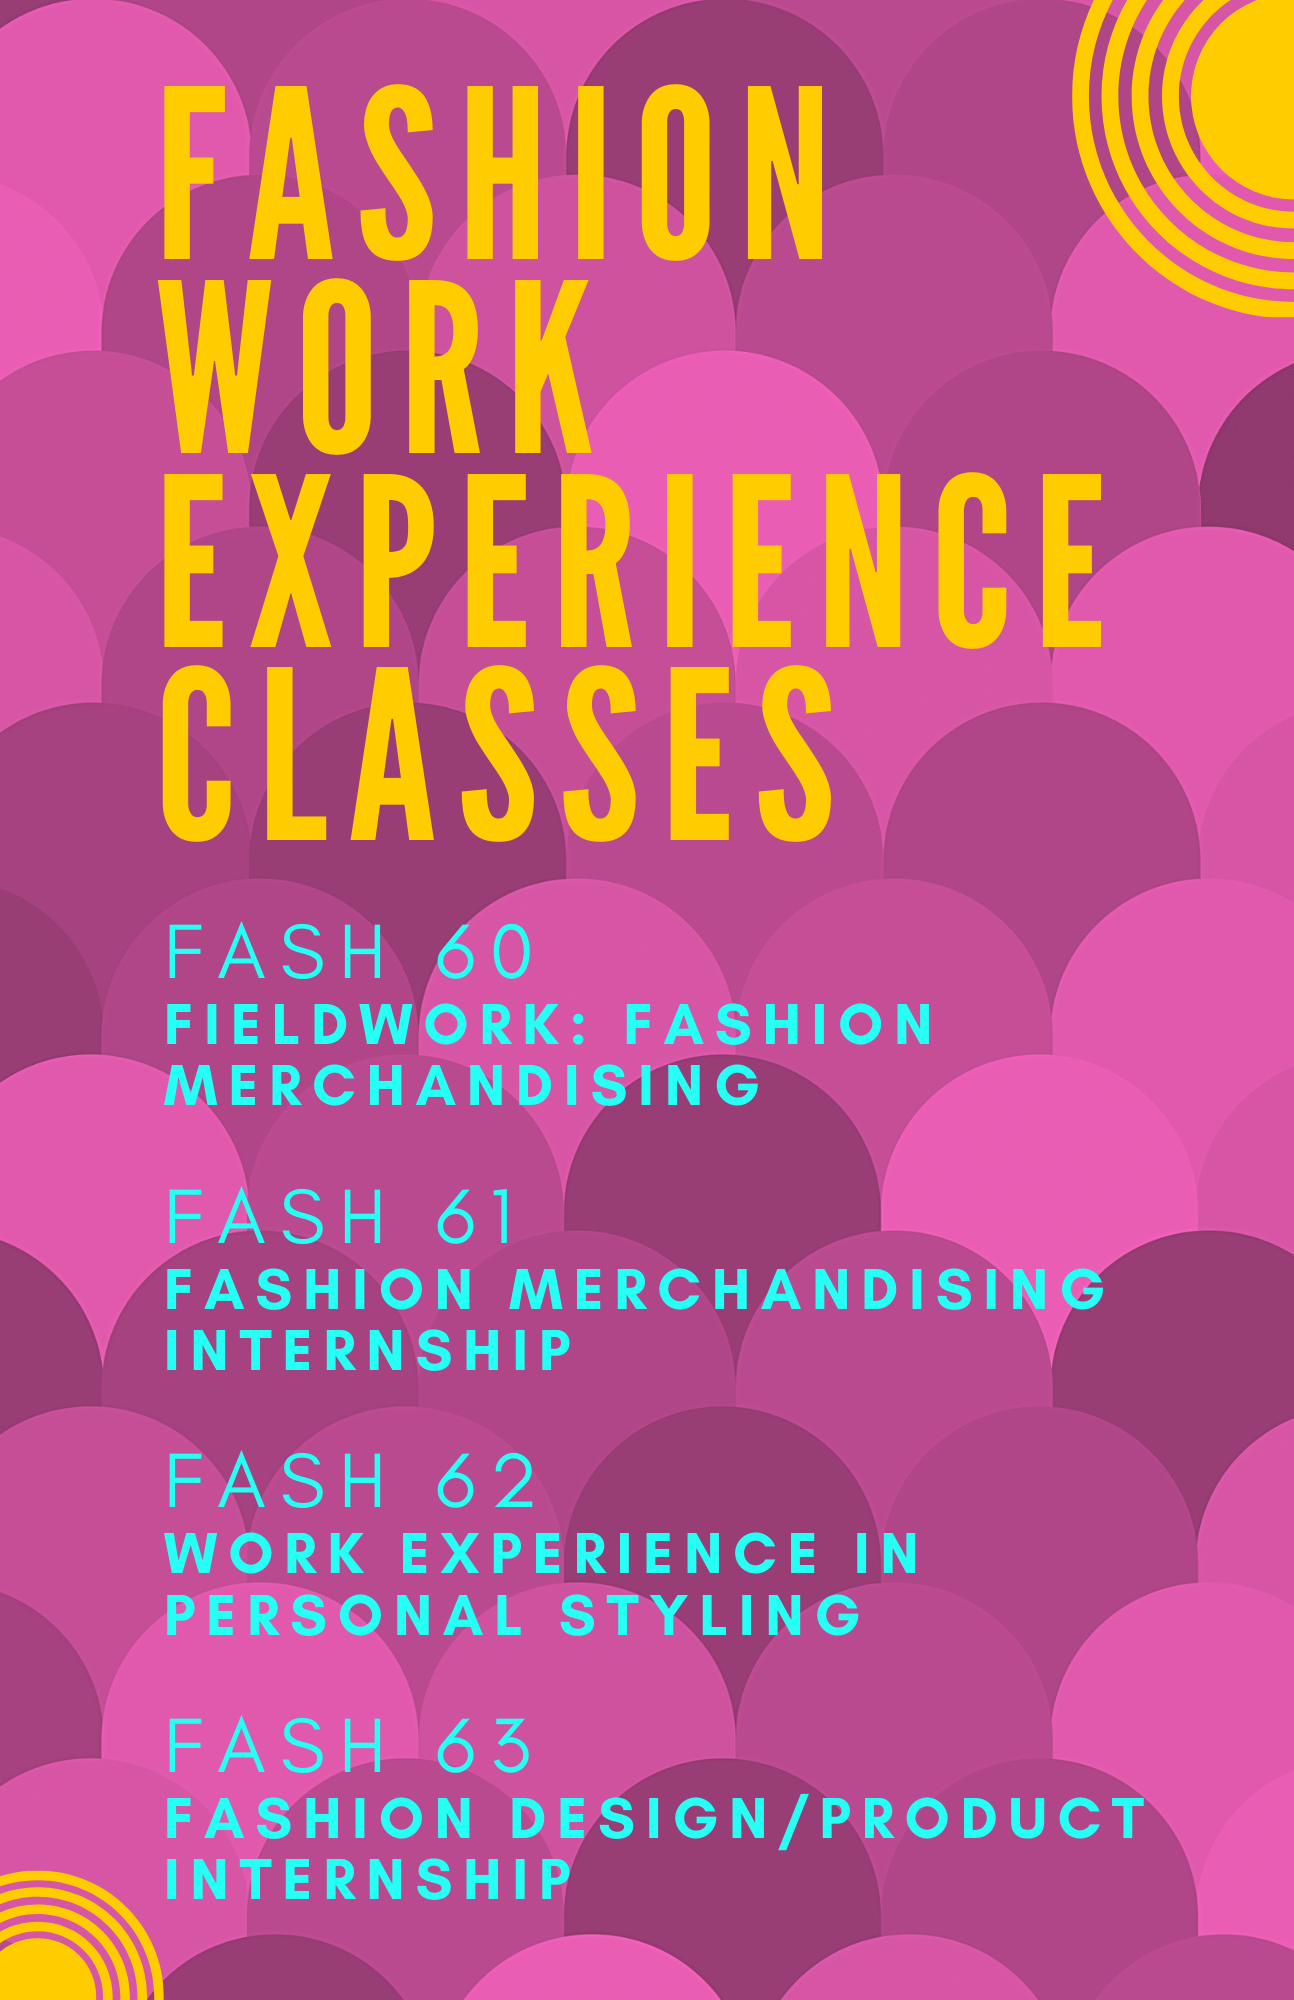 Fashion Work Experience Classes flyer - FASH 60, 61, 62, 63